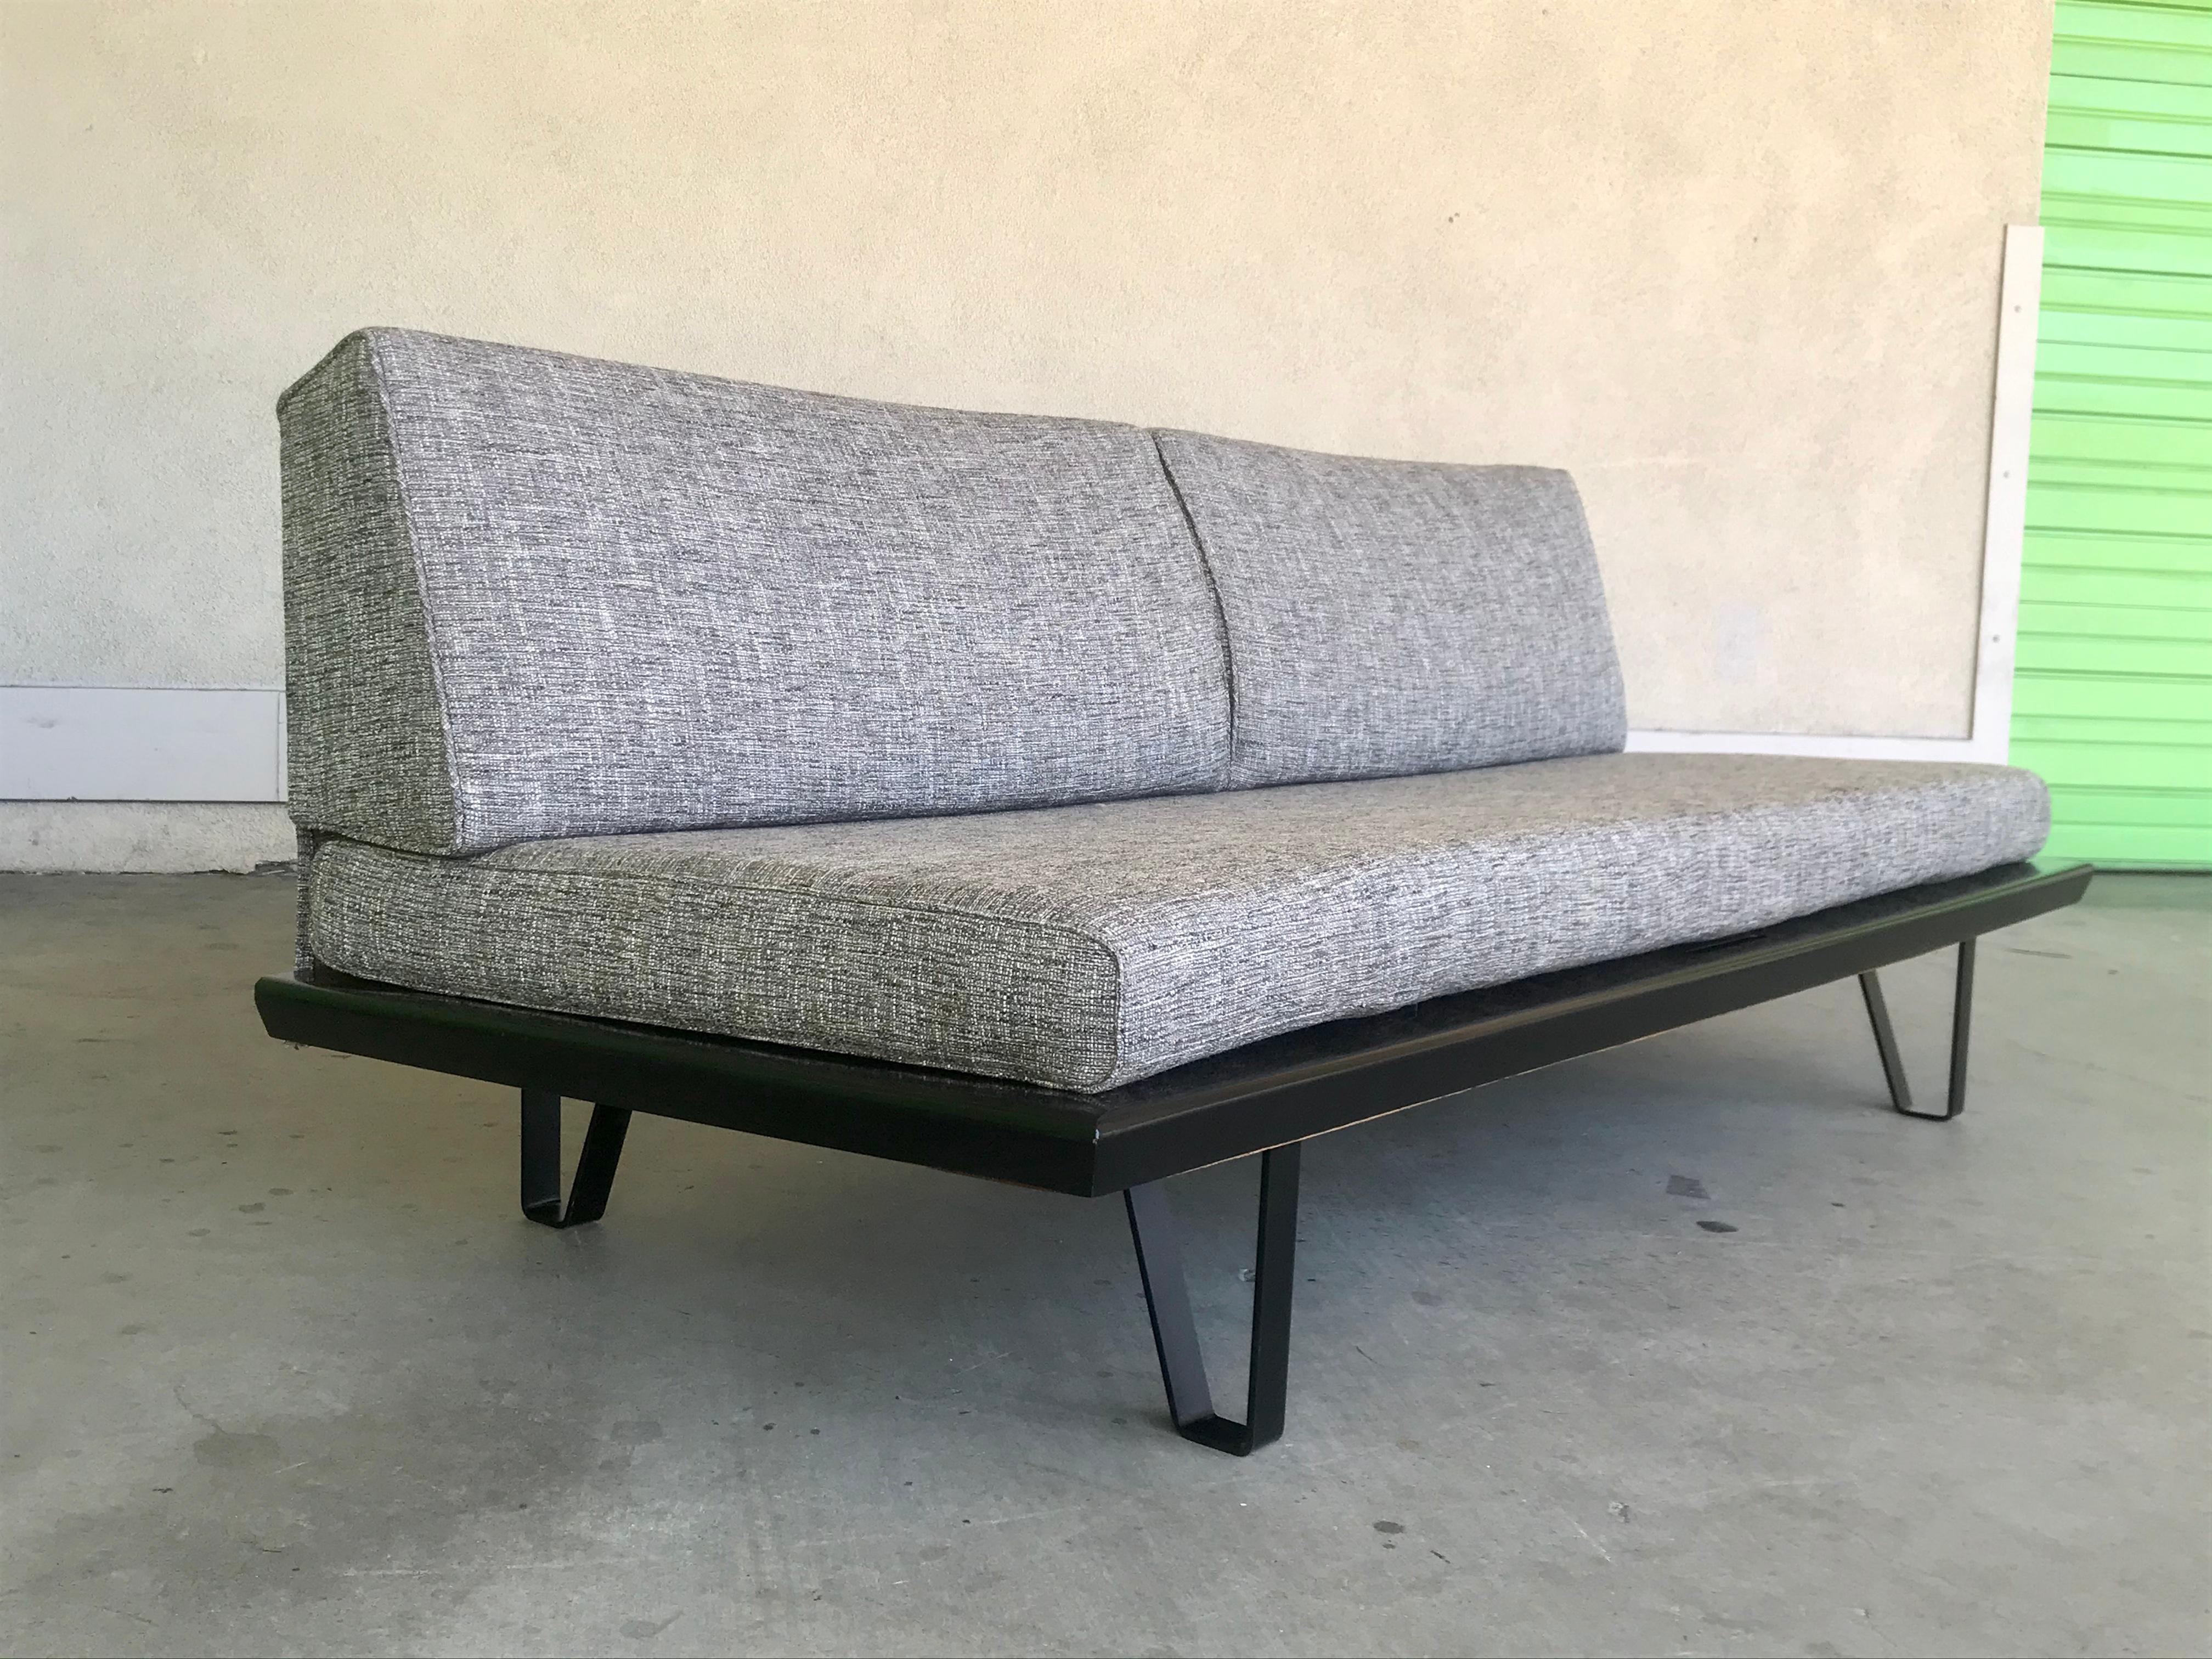 Classic California modern design.
Great for a studio, office, work space et cetra.
Restored a few years ago. 
Iron base, lacquered wood with upholstery.
Original sisal spring net. 
Pulls out 32